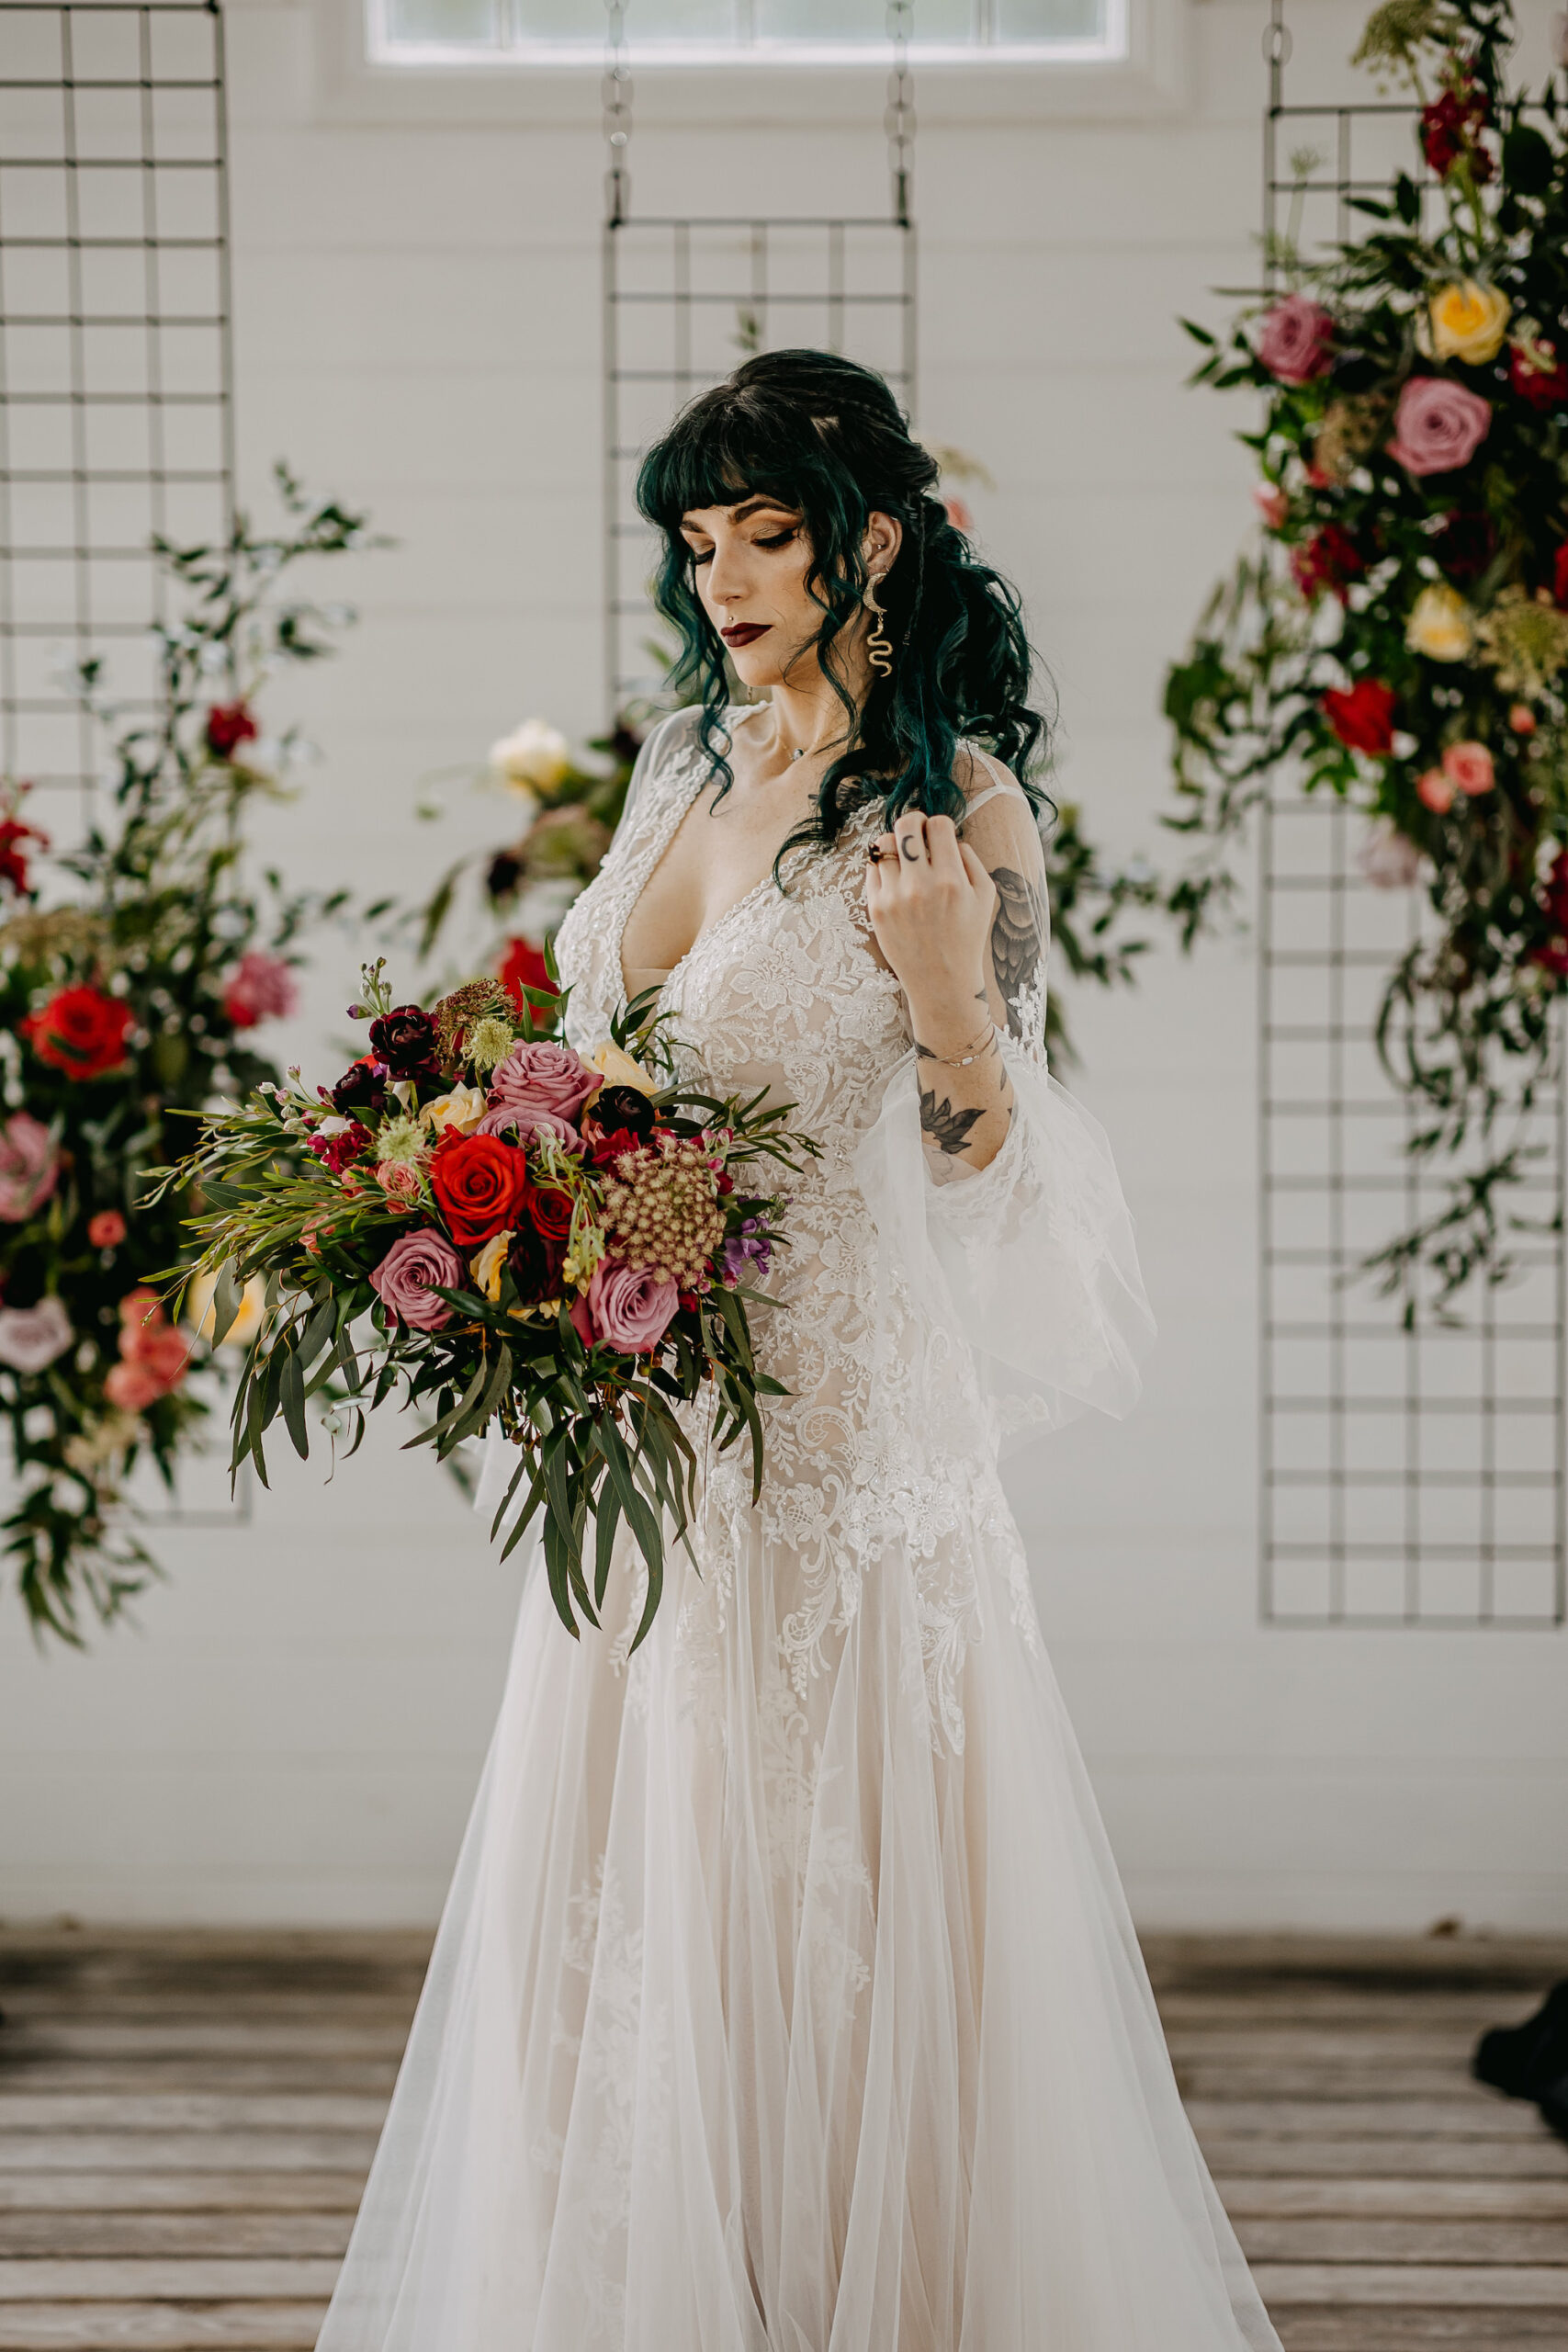 White and Nude Bell Sleeve Lace and Chiffon Mermaid Wedding Dress with Cascading Red, Pink, and Yellow Rose Bridal Bouquet | Tampa Bay Florist Monarch Events and Design | Hair and Makeup Artist Femme Akoi Beauty Studio